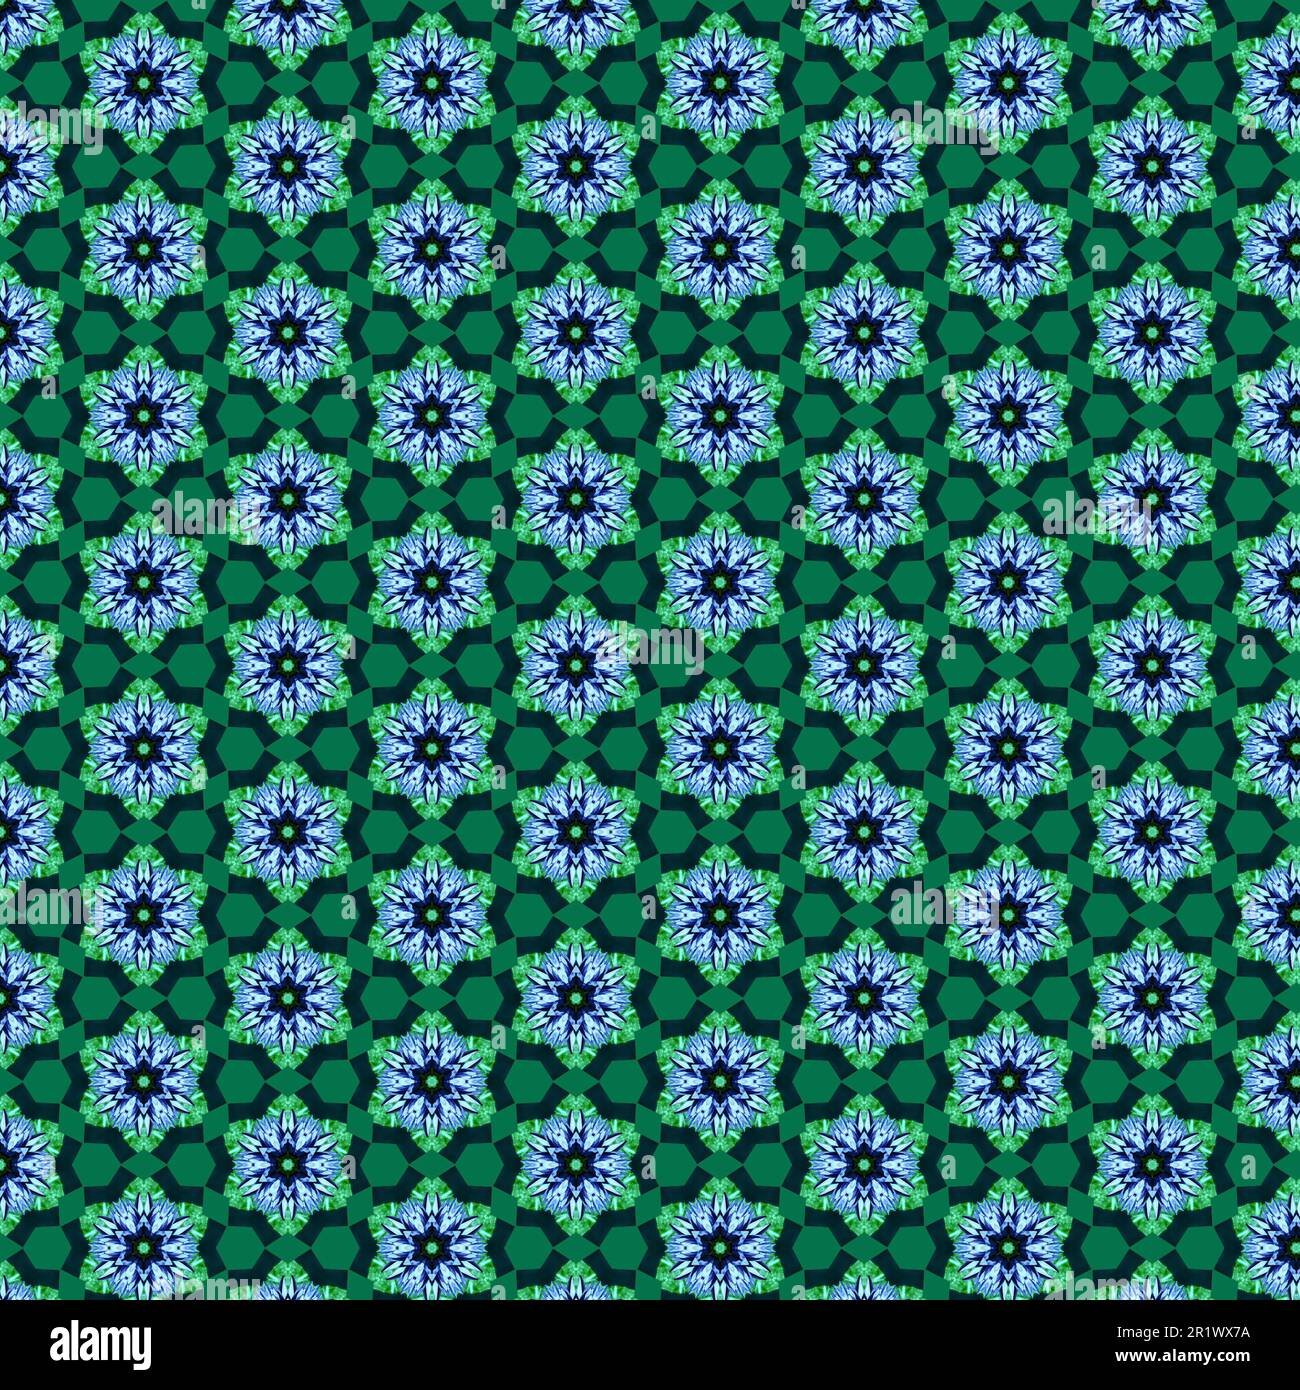 Green and blue spring summer floral seamless pattern repeating geometric and organic motif design elements, abstract background. Stock Photo